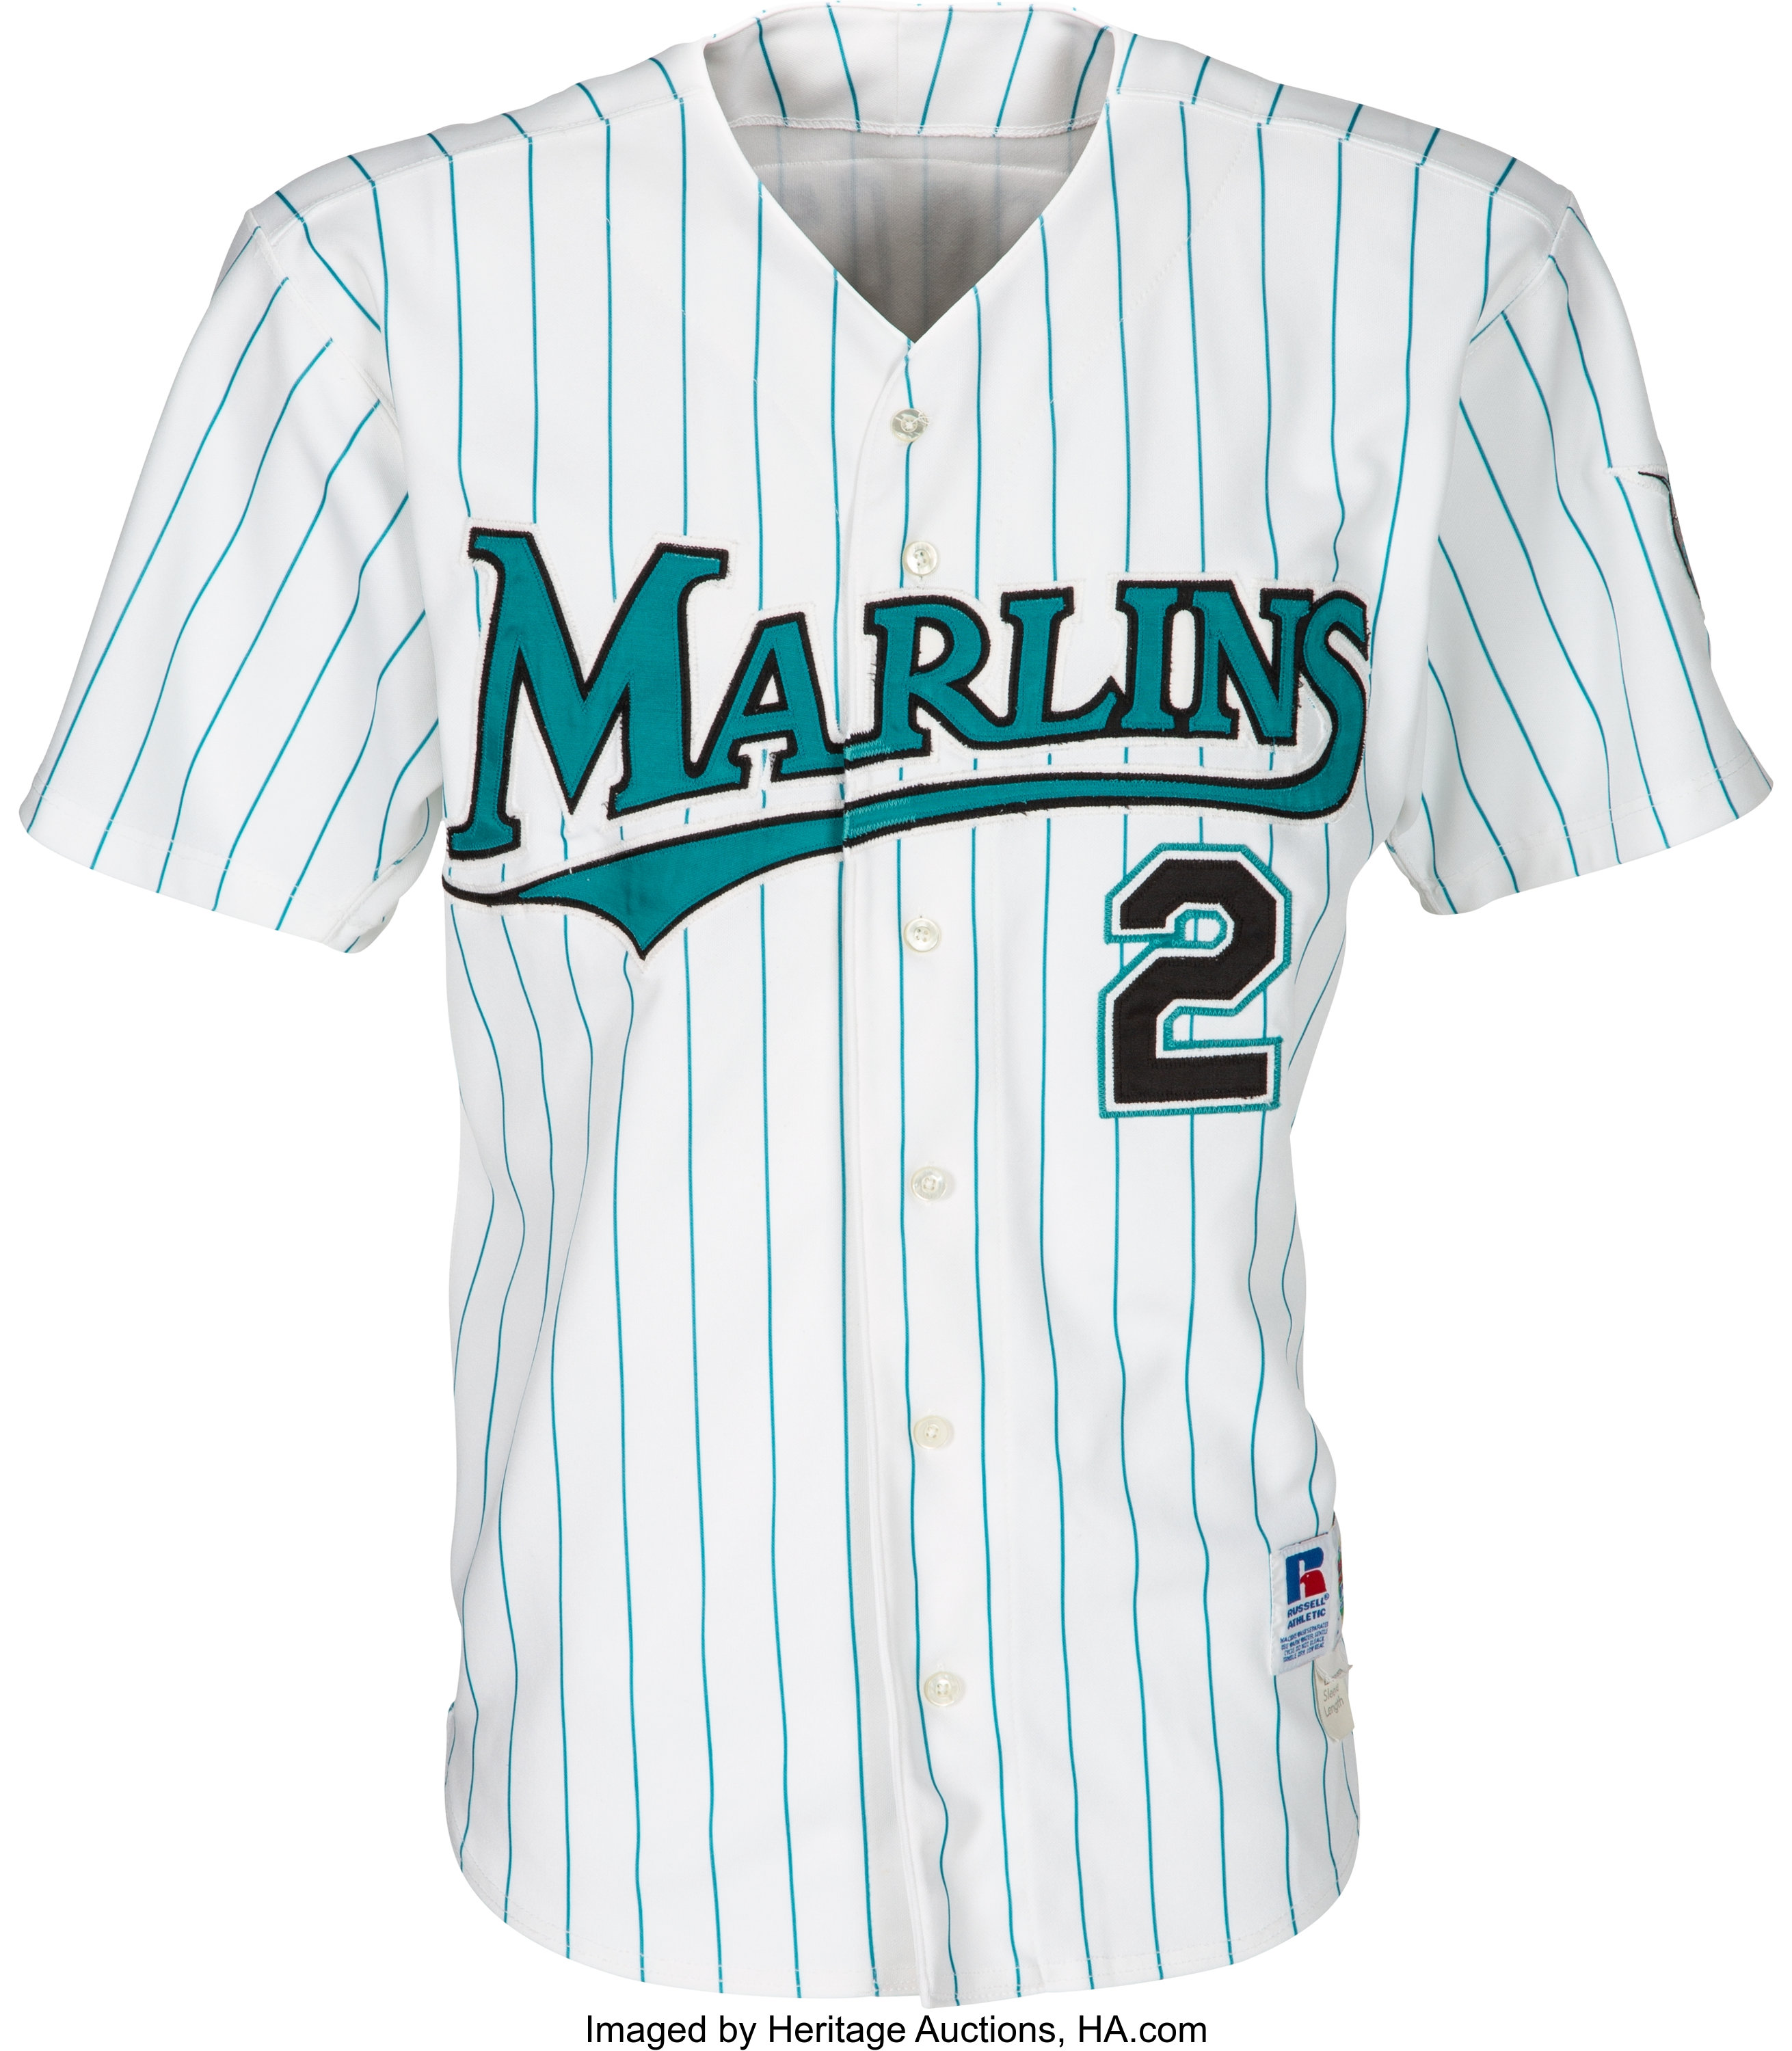 1993-02 Florida Marlins Blank Game Issued White Jersey 50 DP14325